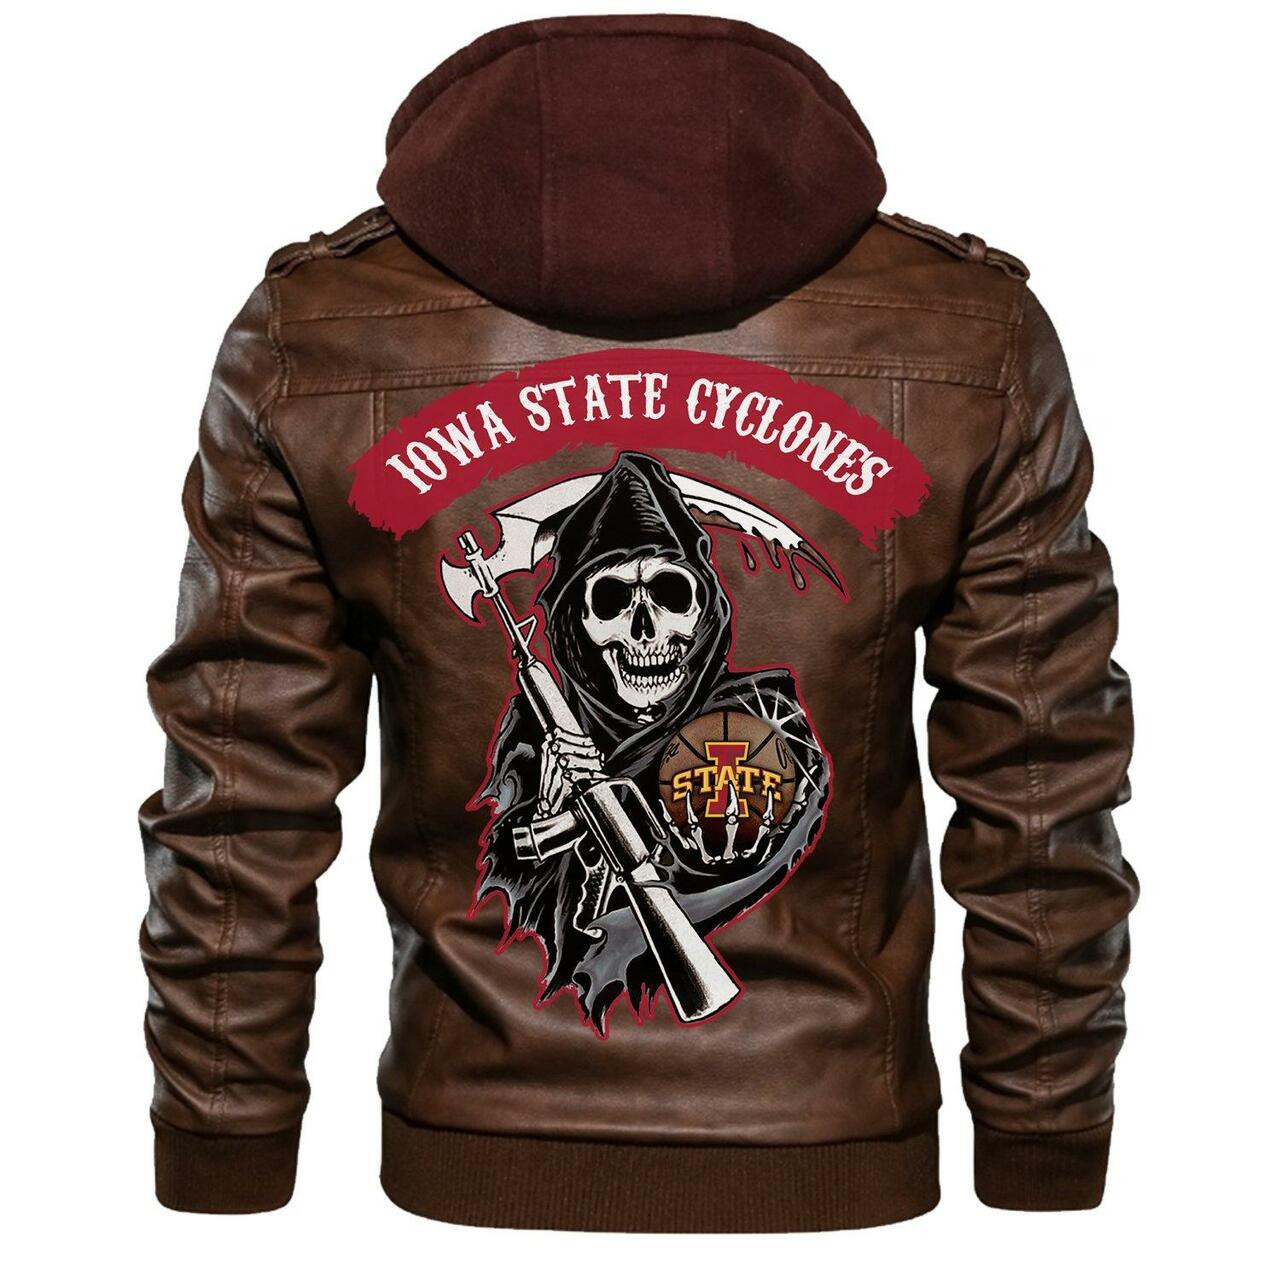 Don't wait another minute, Get Hot Leather Jacket today 96